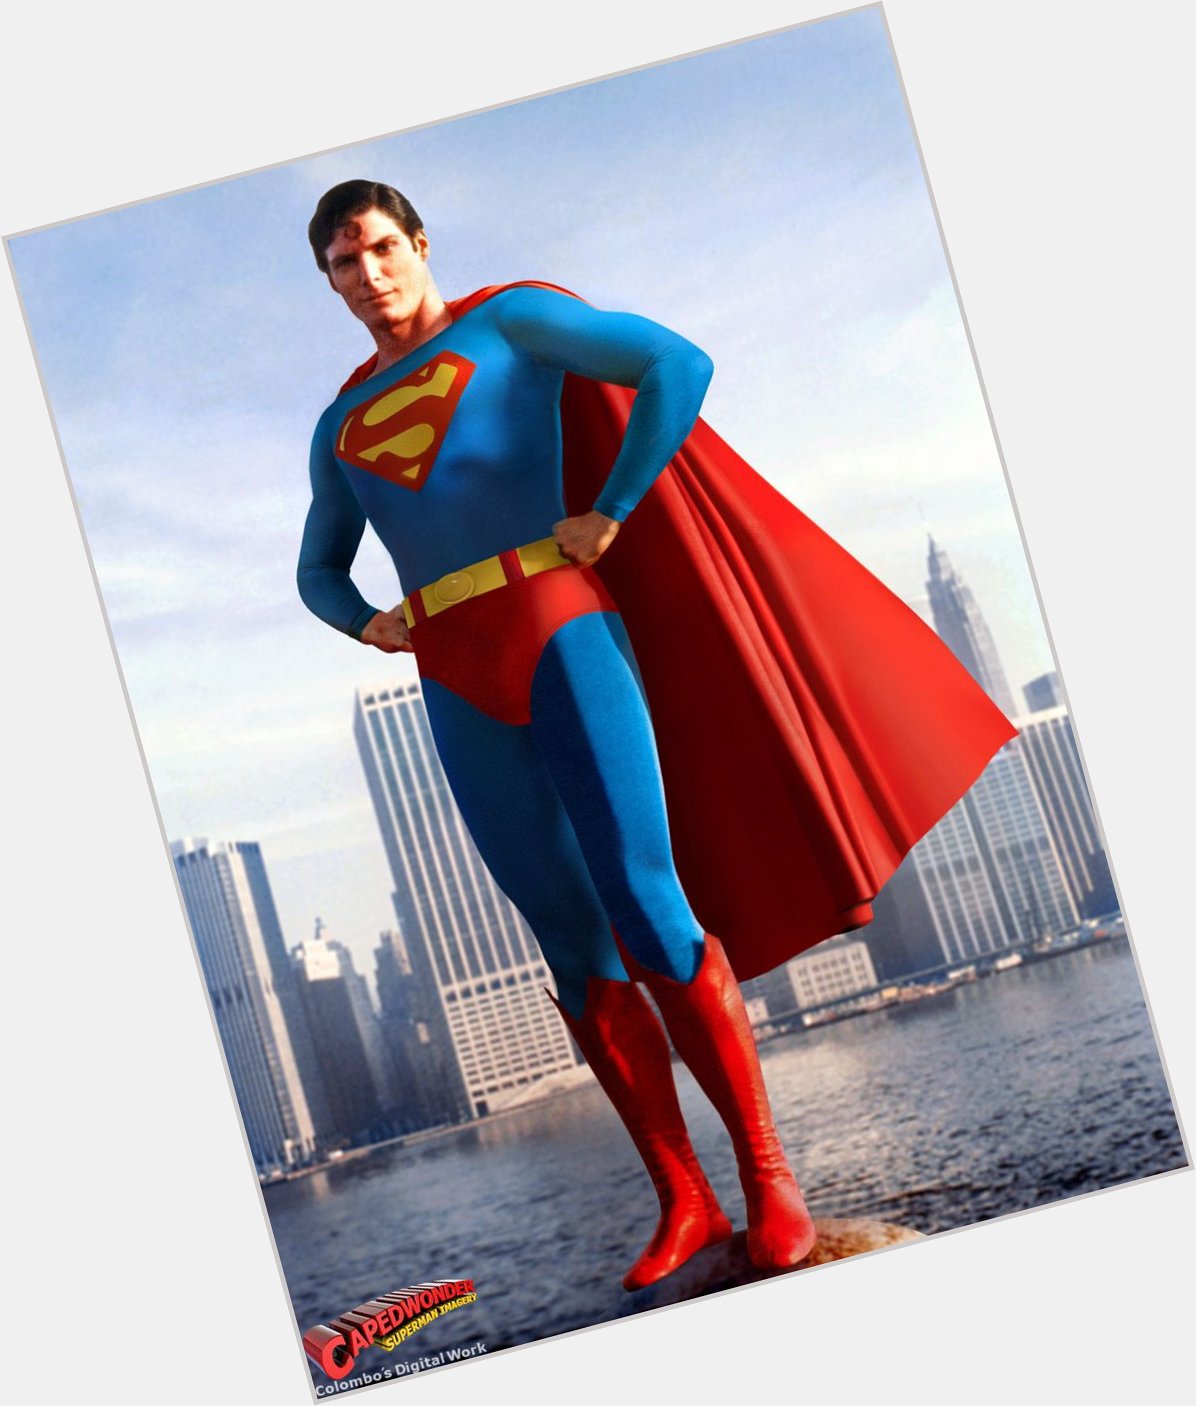 Happy birthday to the late Christopher Reeve. Over 40 years later and we still believe he could fly. 